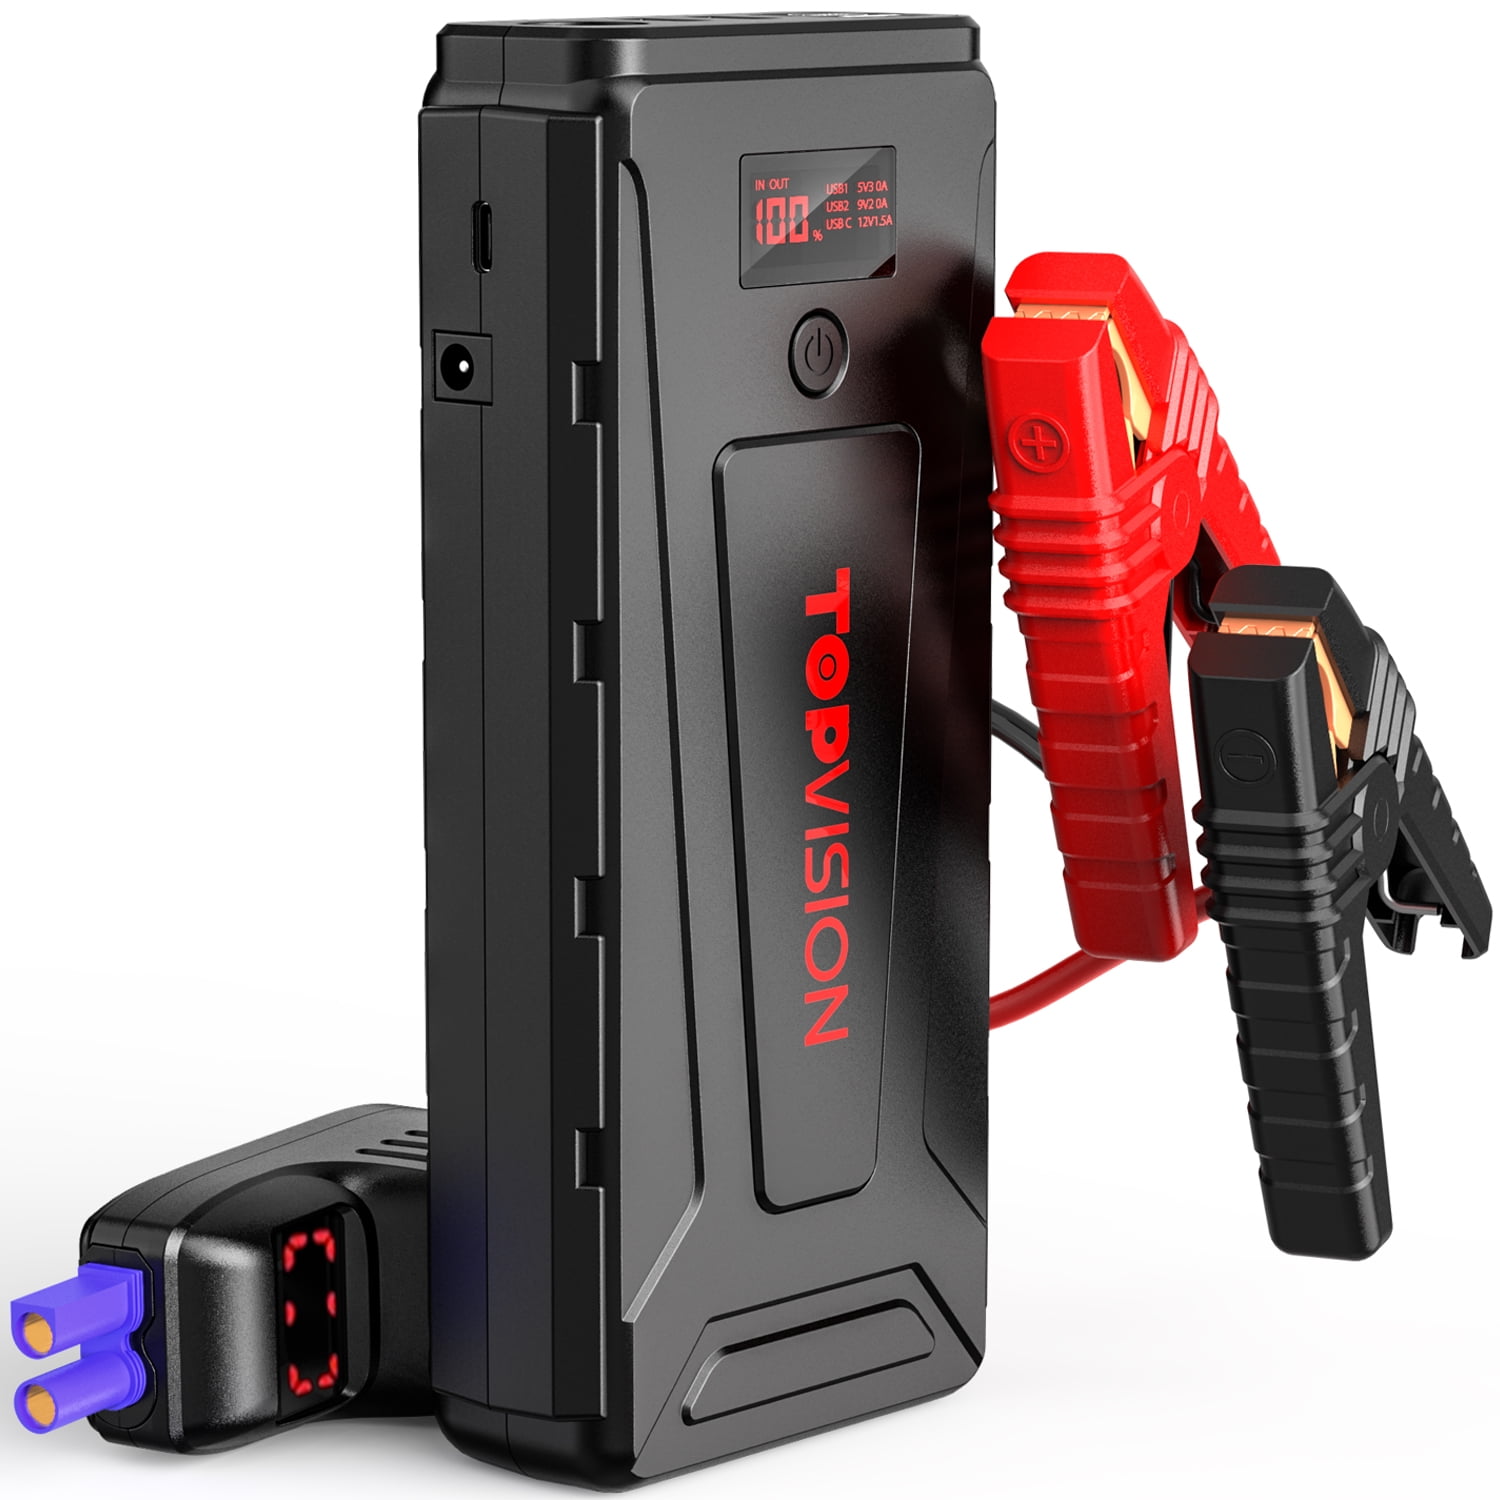 TOPVISION 2200A Peak Portable Car Power Pack with USB Quick Charge 3.0 Battery Jumper Starter Up to 8.0L Gas or 8L Diesel Engine 12V Portable Auto Battery Booster 